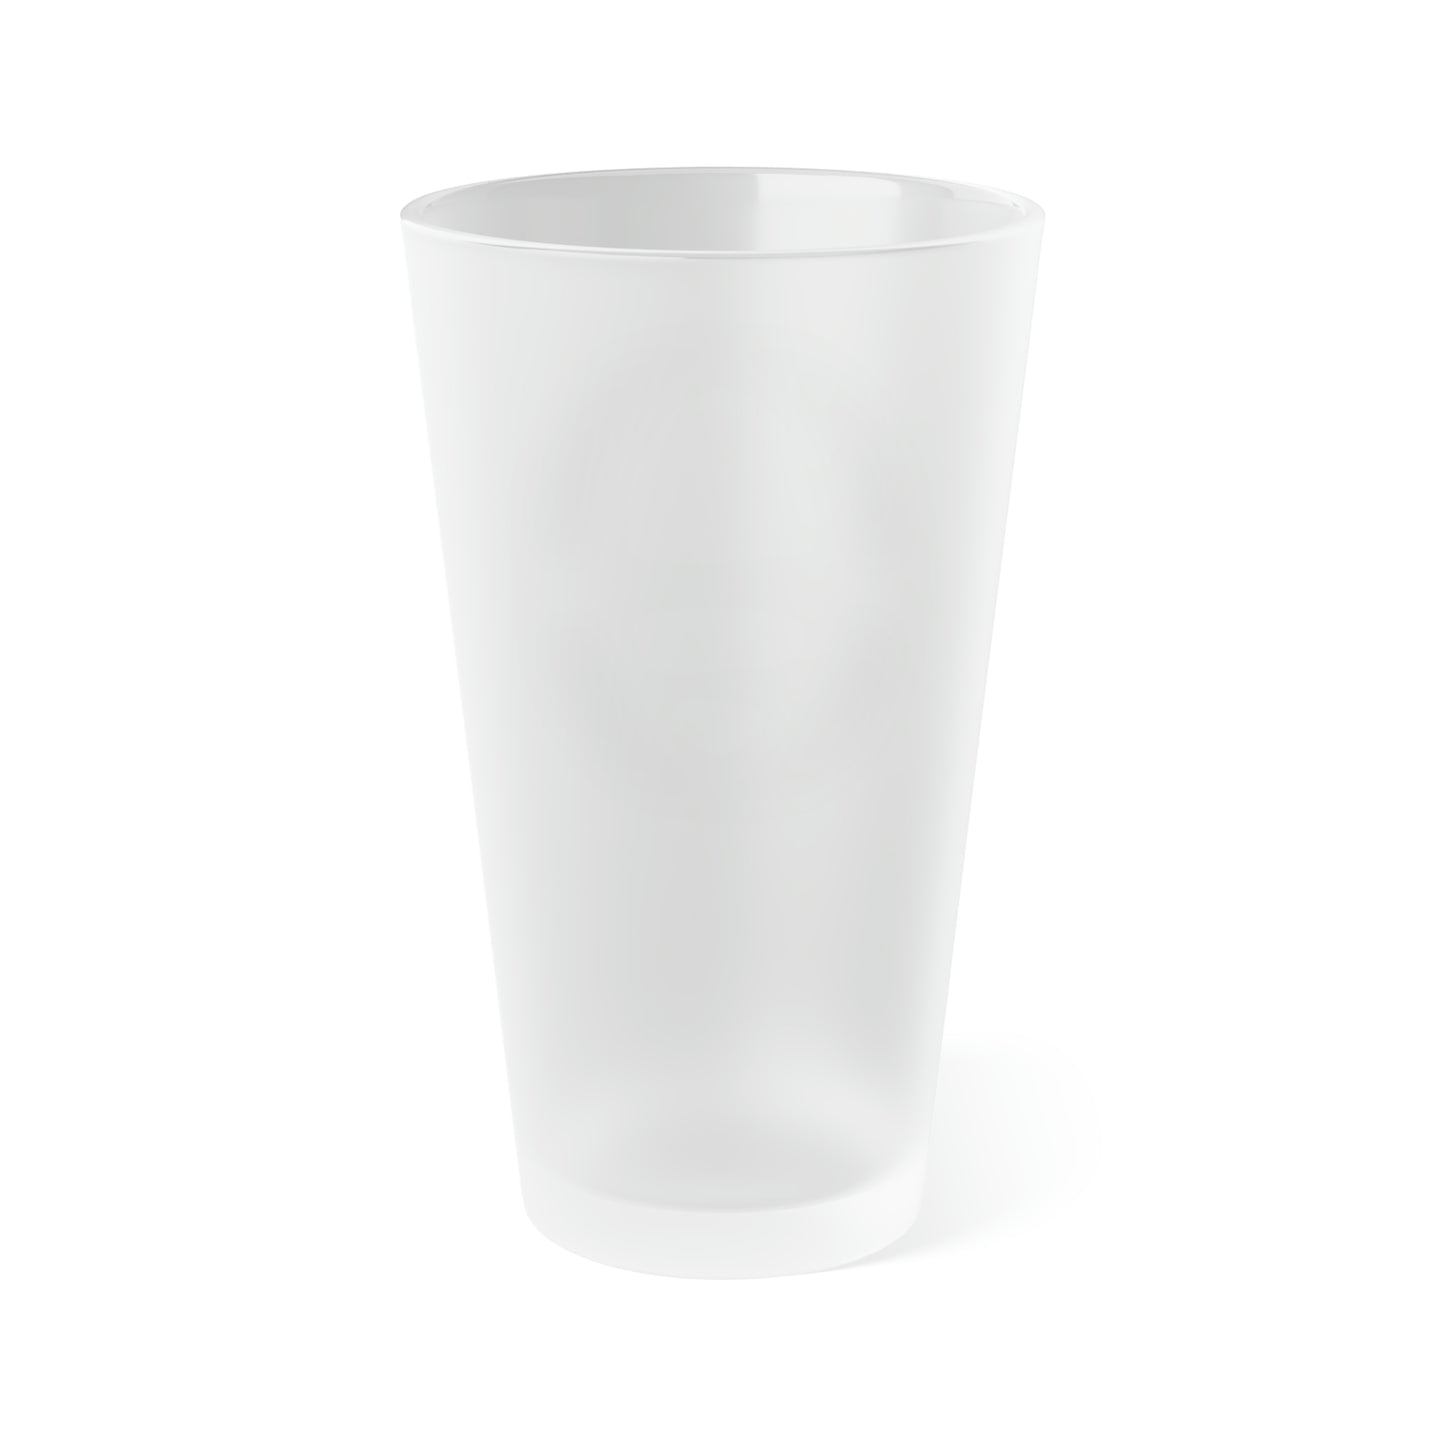 O'Kelley's: Frosted Pint Glass, 16oz